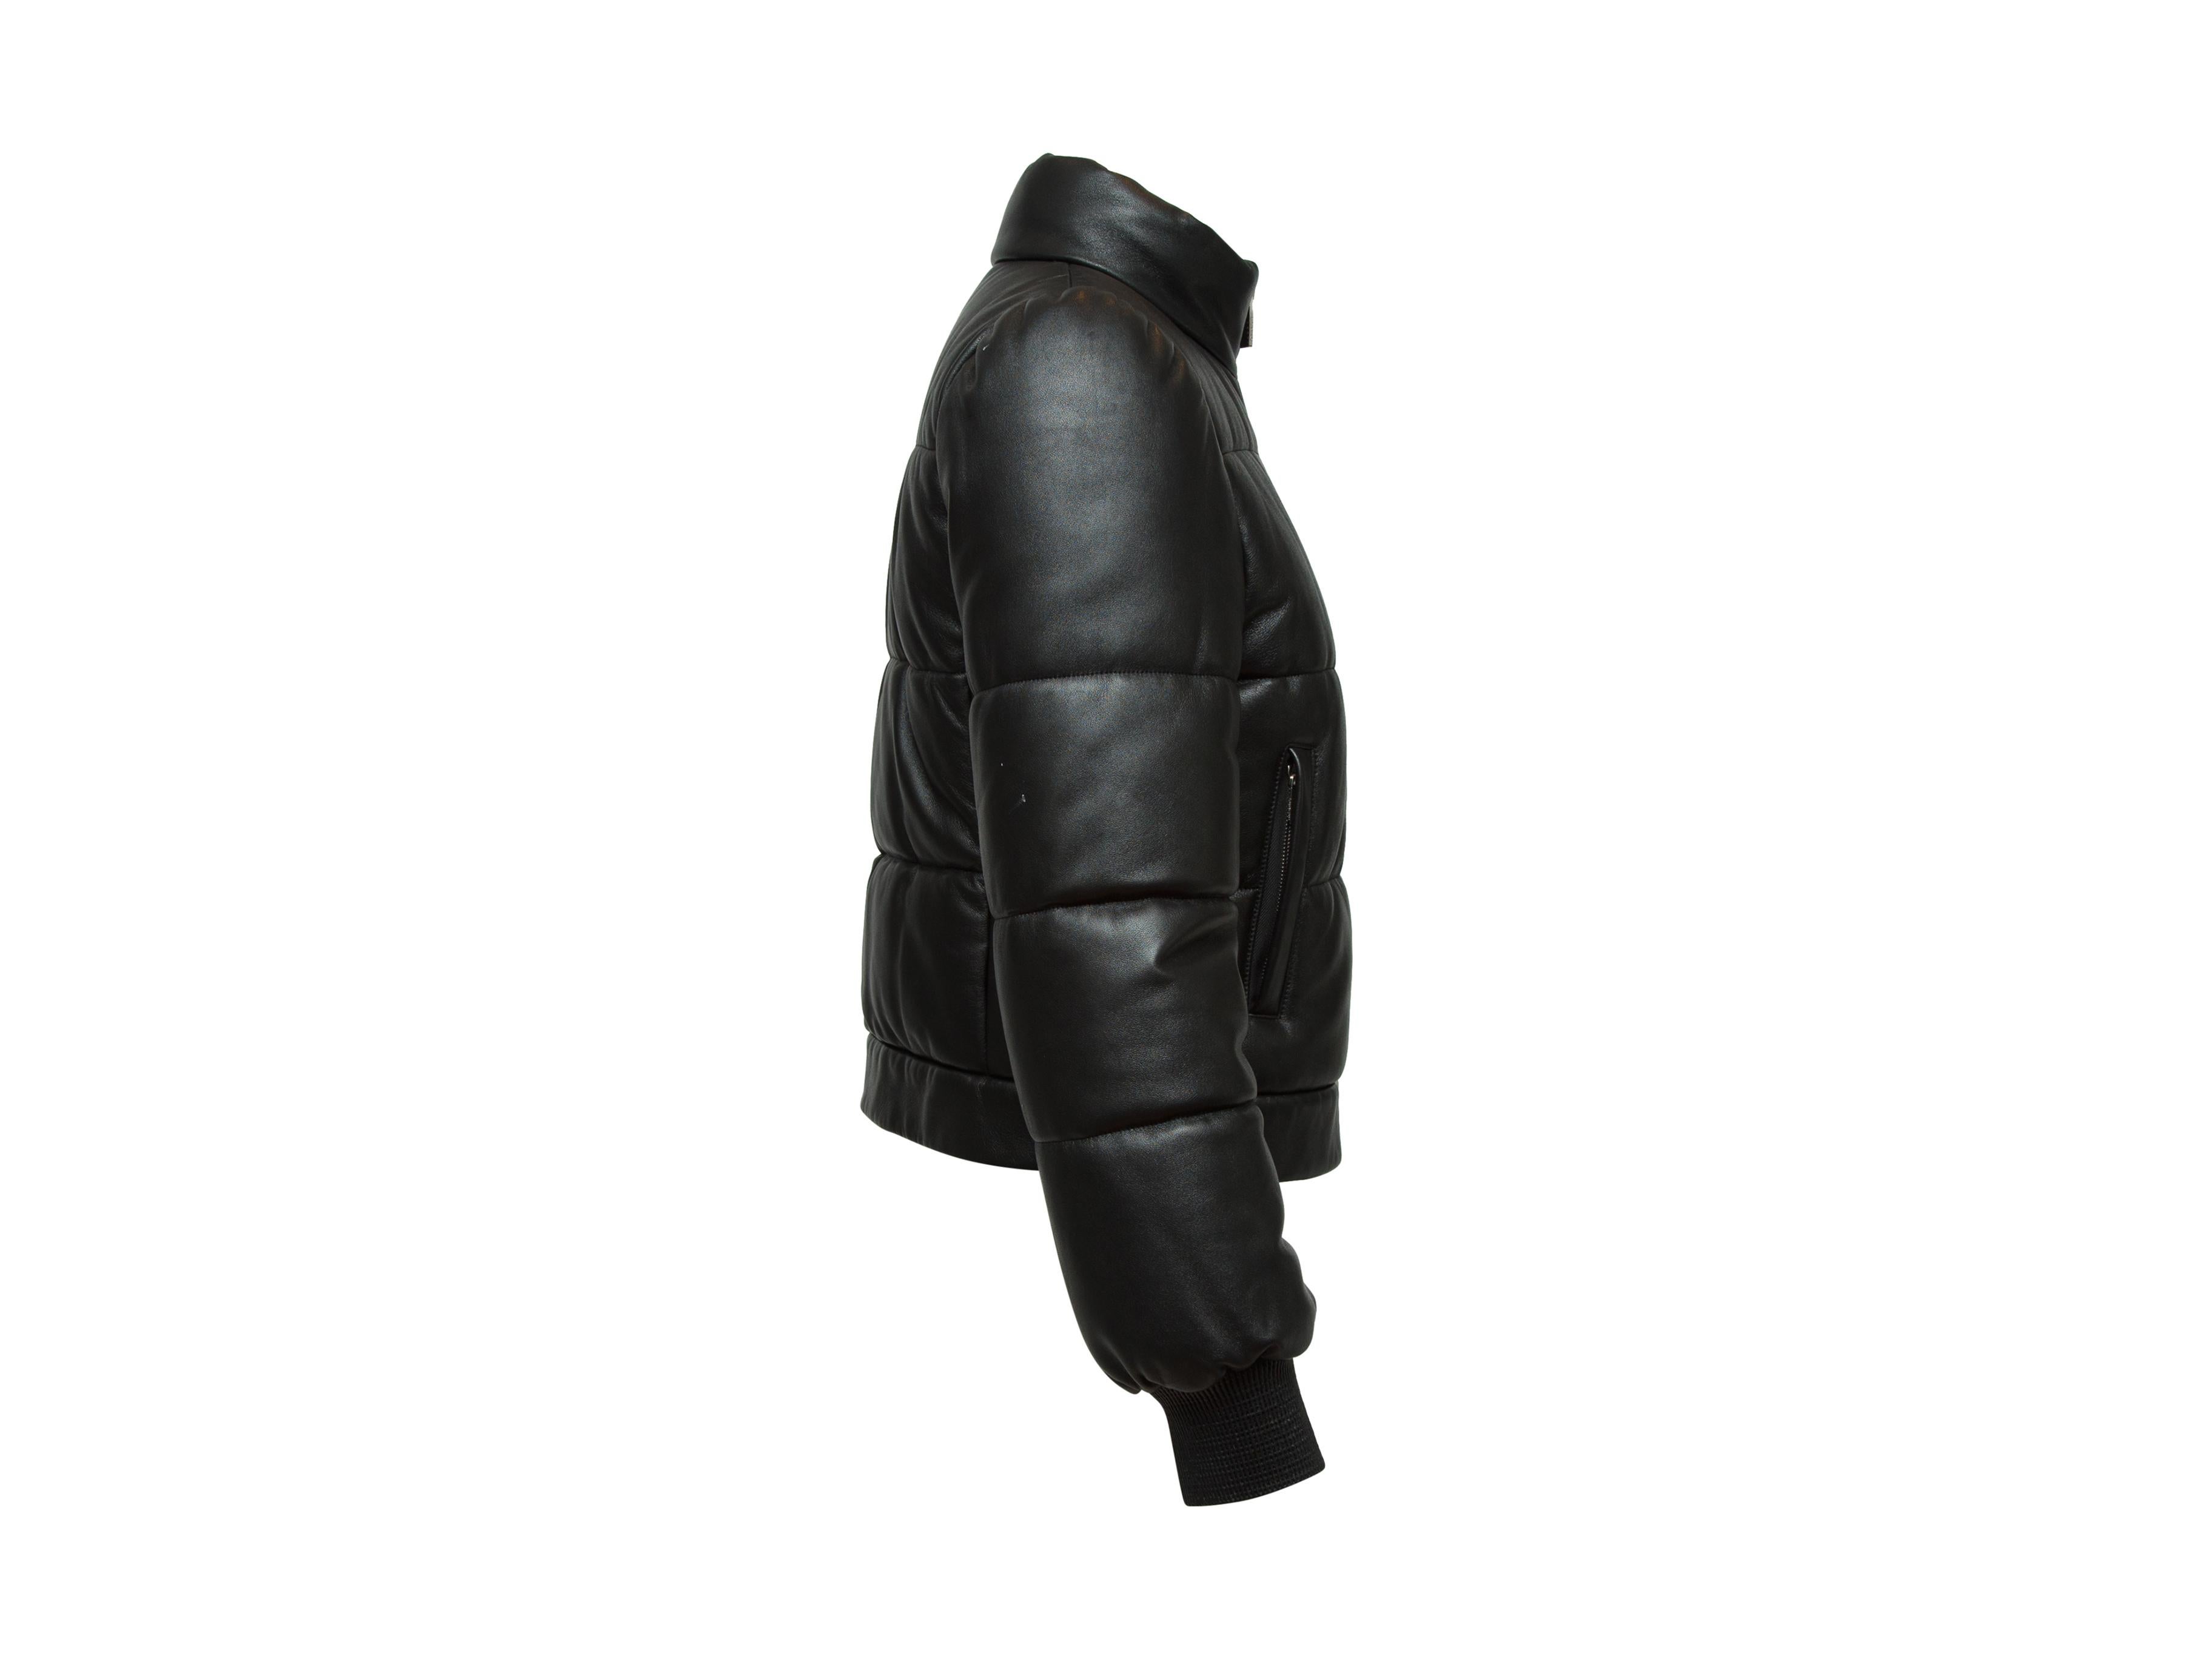 Product details: Black leather puffer jacket by Michael Kors Collection. Mock neck. Dual pockets. Zip closure at front. 30